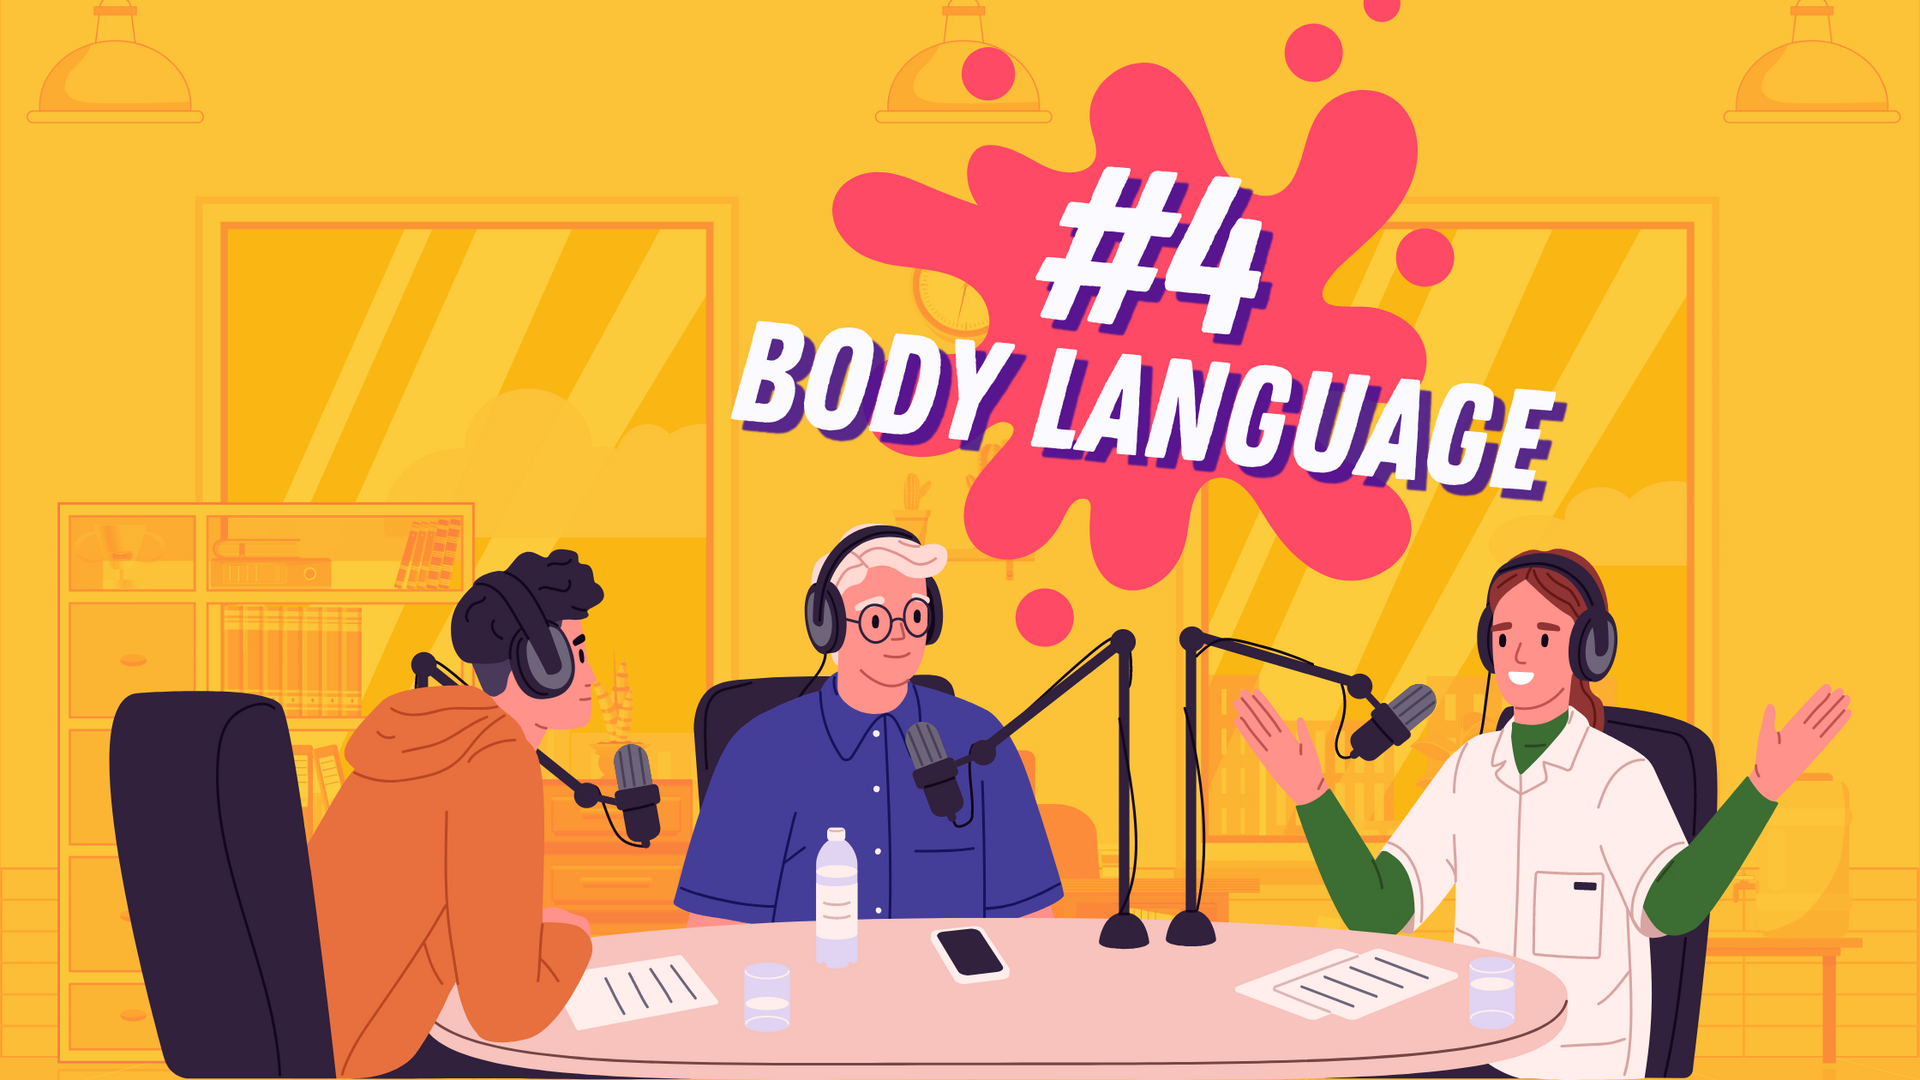 Podcast Virtuoso explains that body language helps build confident on podcasts